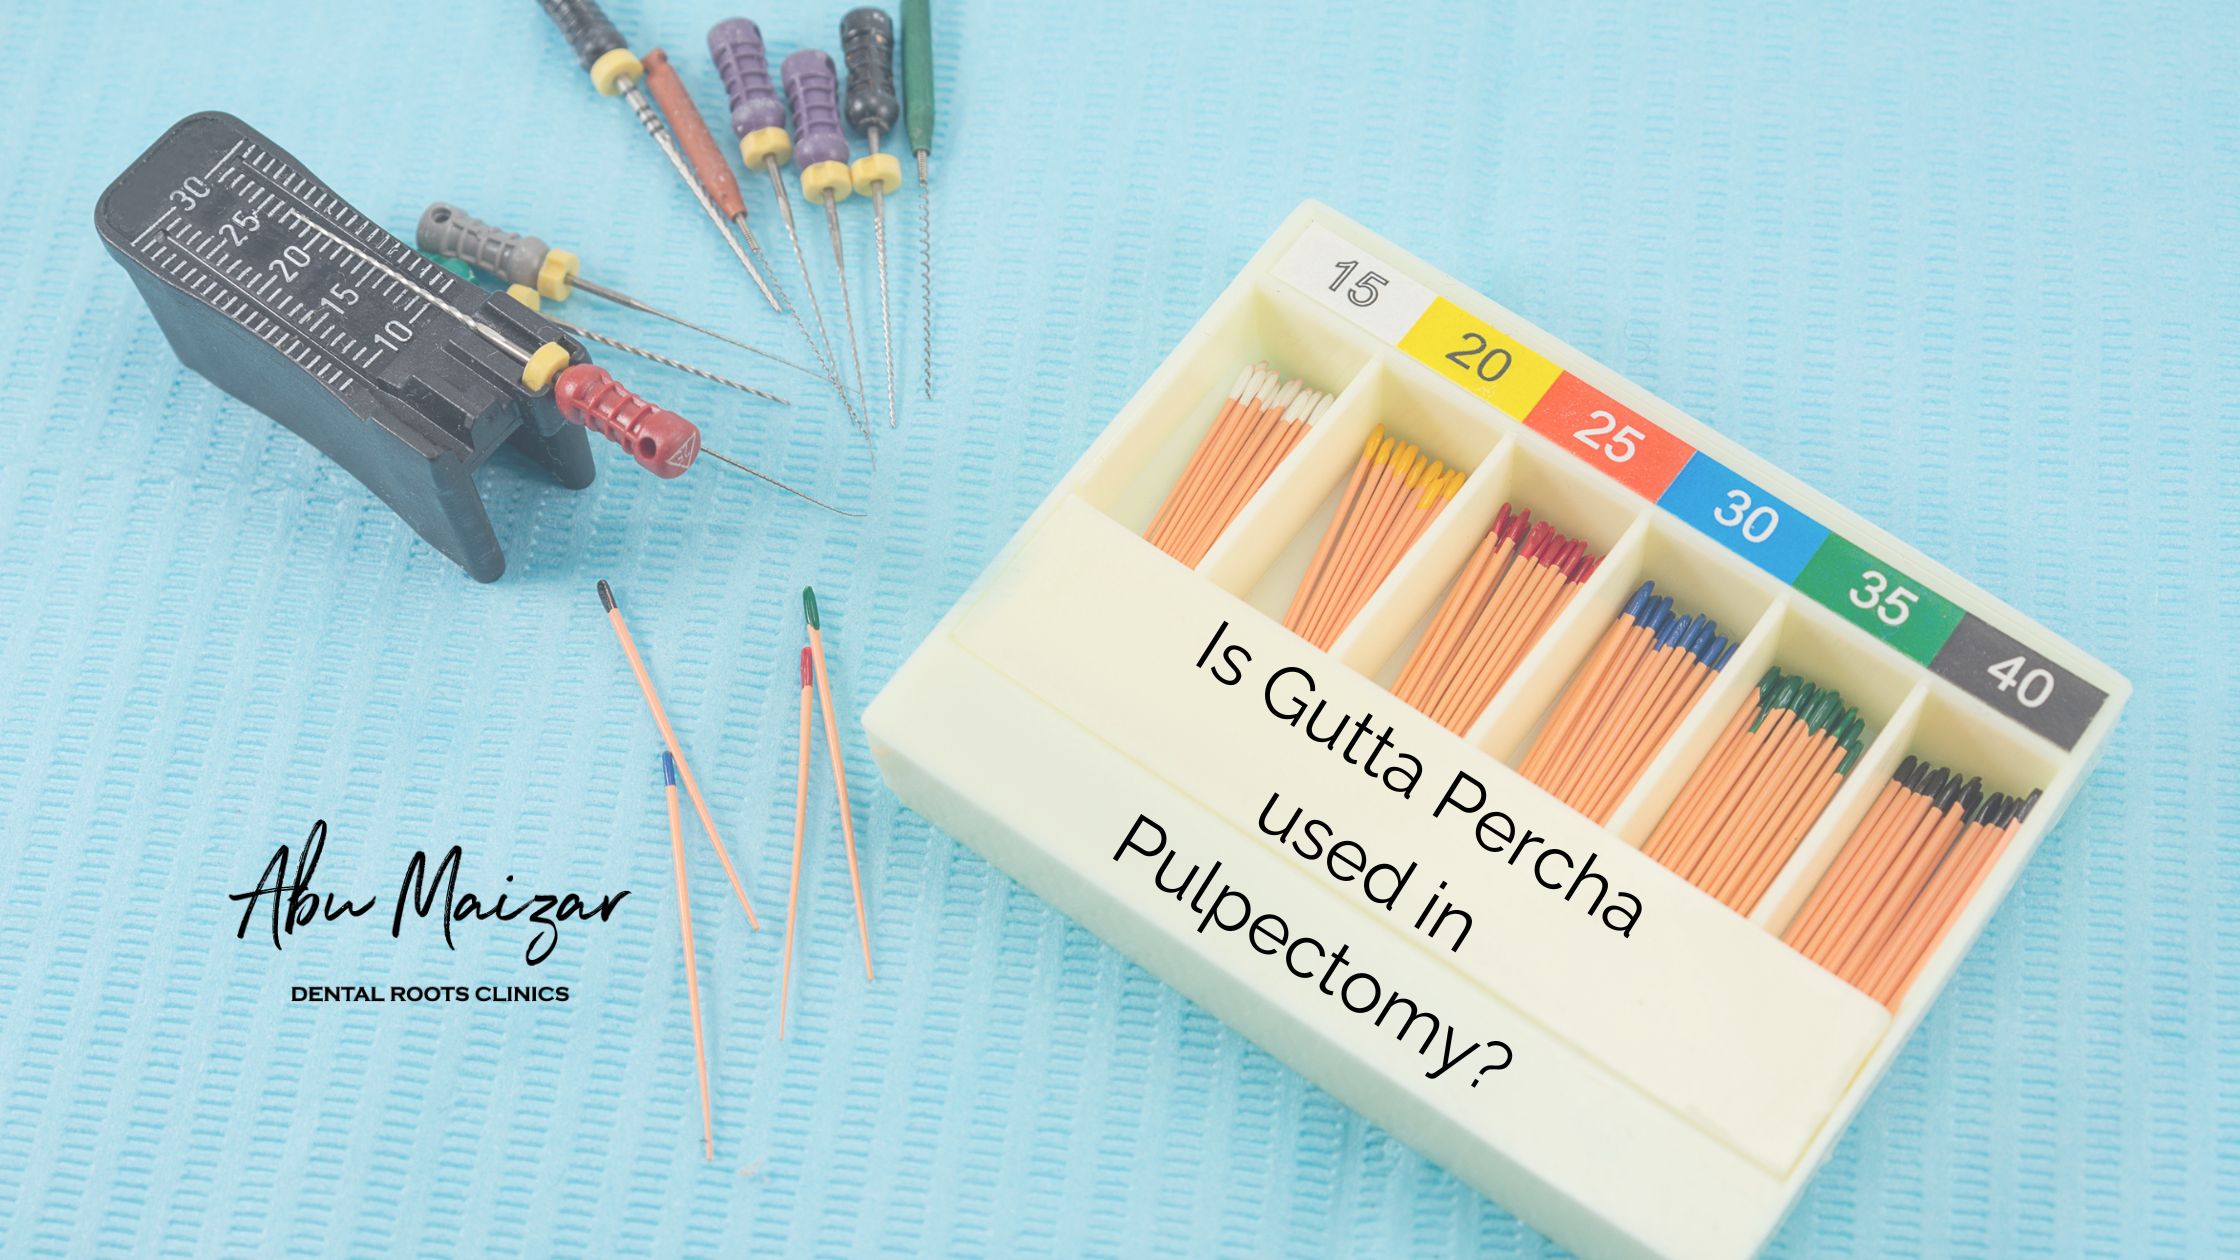 Is Gutta Percha used in pulpectomy?